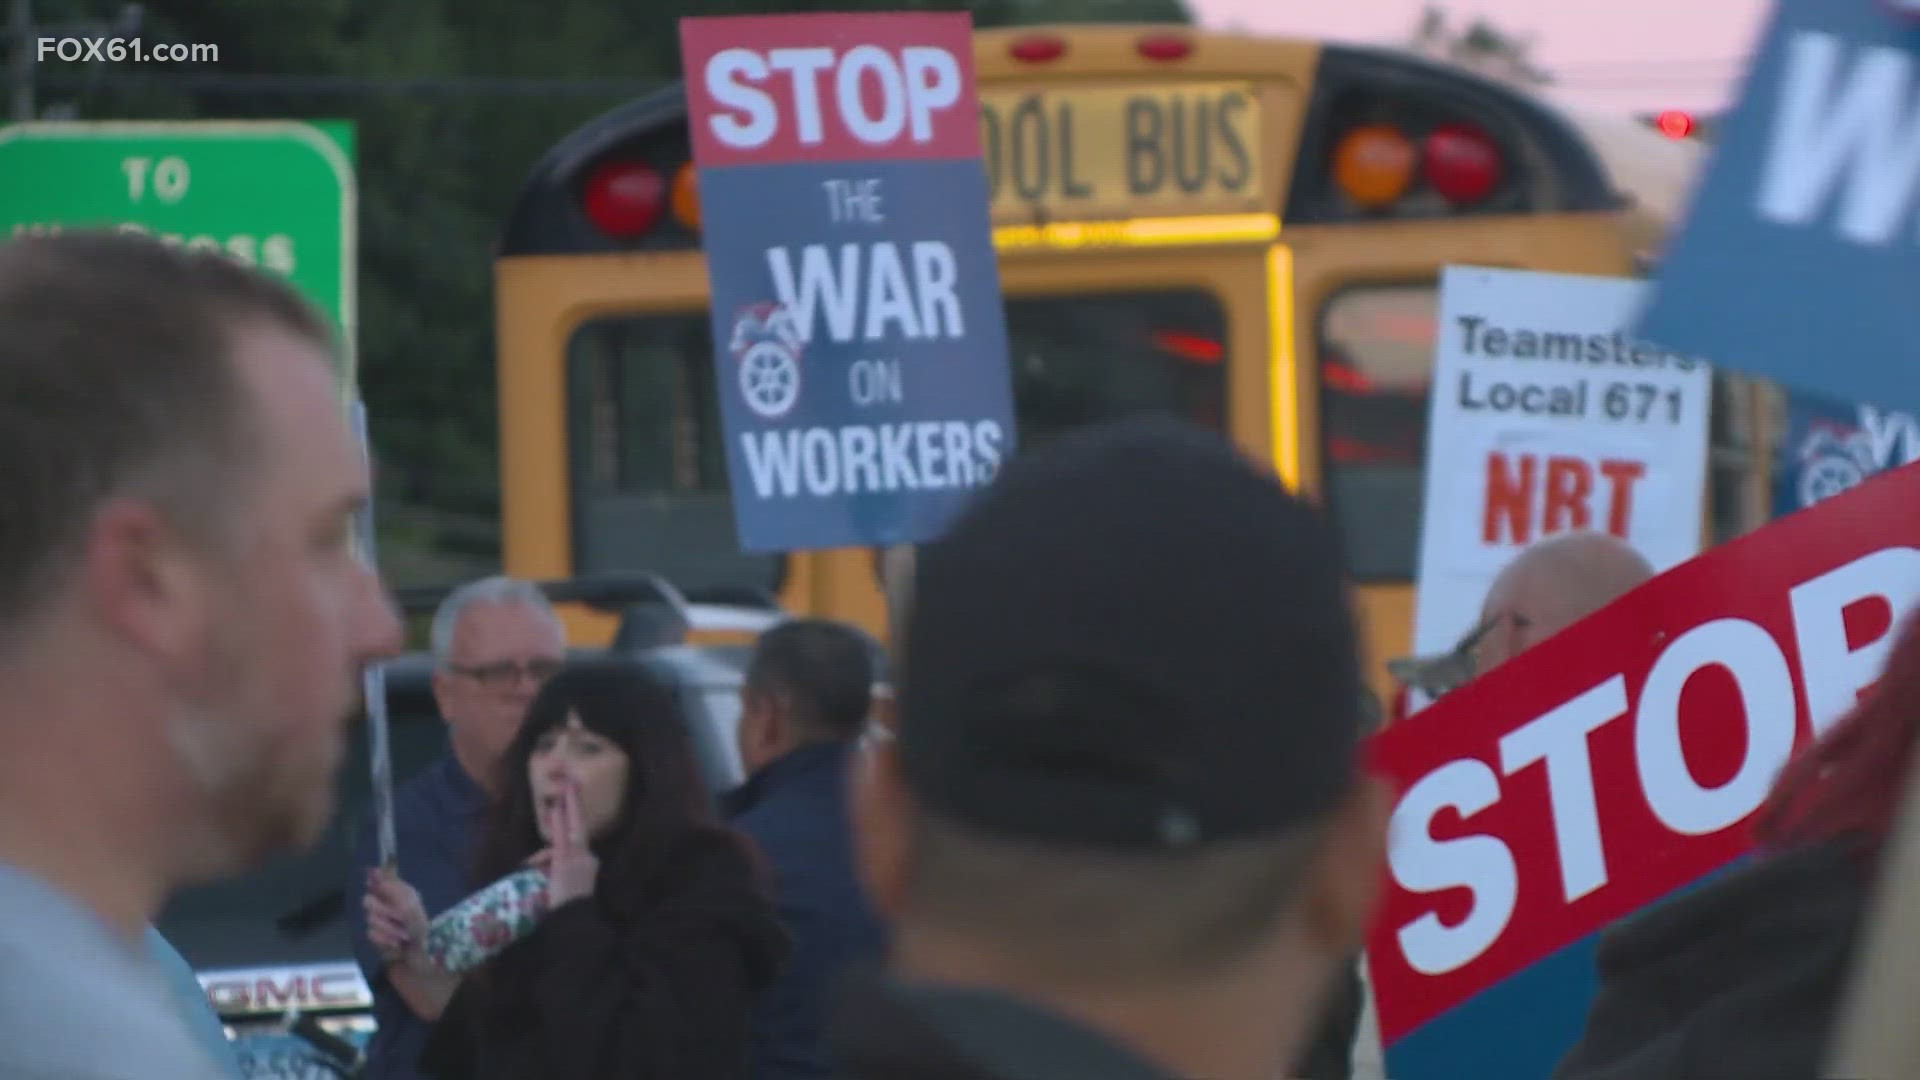 The union said they'll continue the strike after the holiday weekend if the contract negotiations do not get resolved.